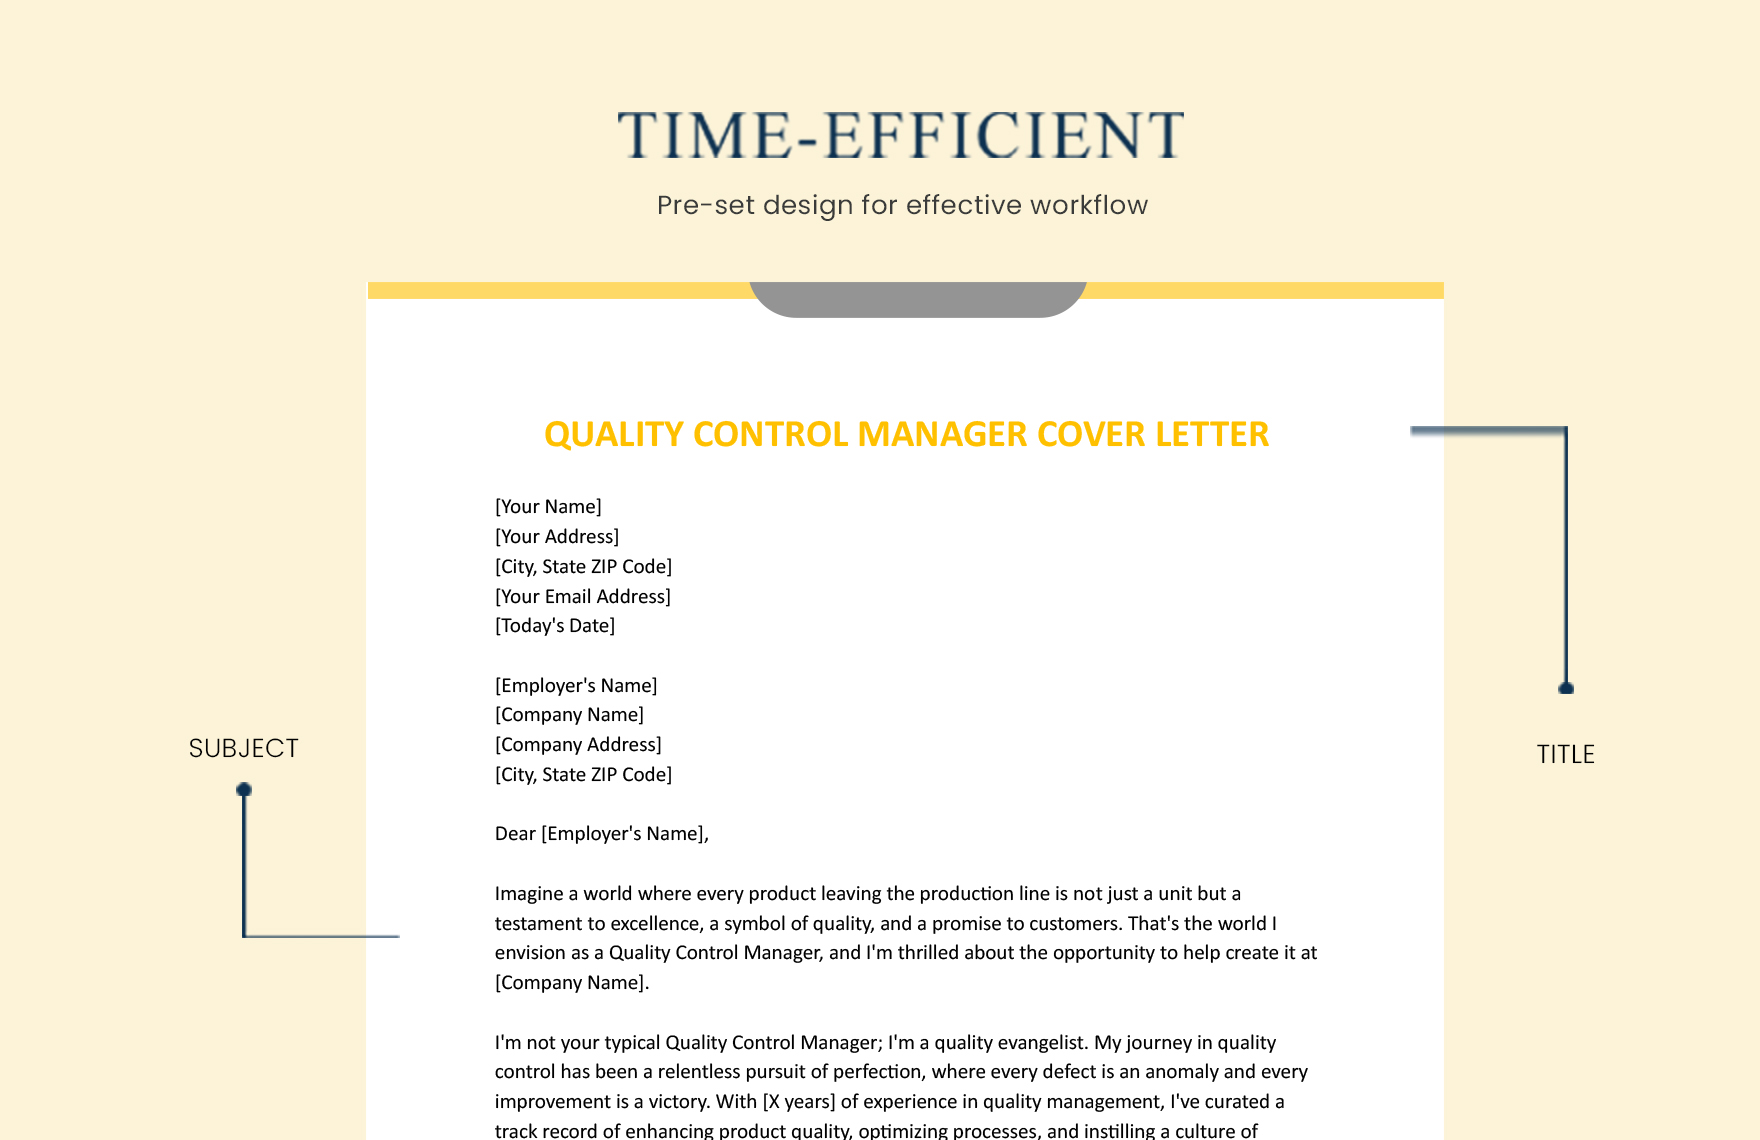 Quality Control Manager Cover Letter